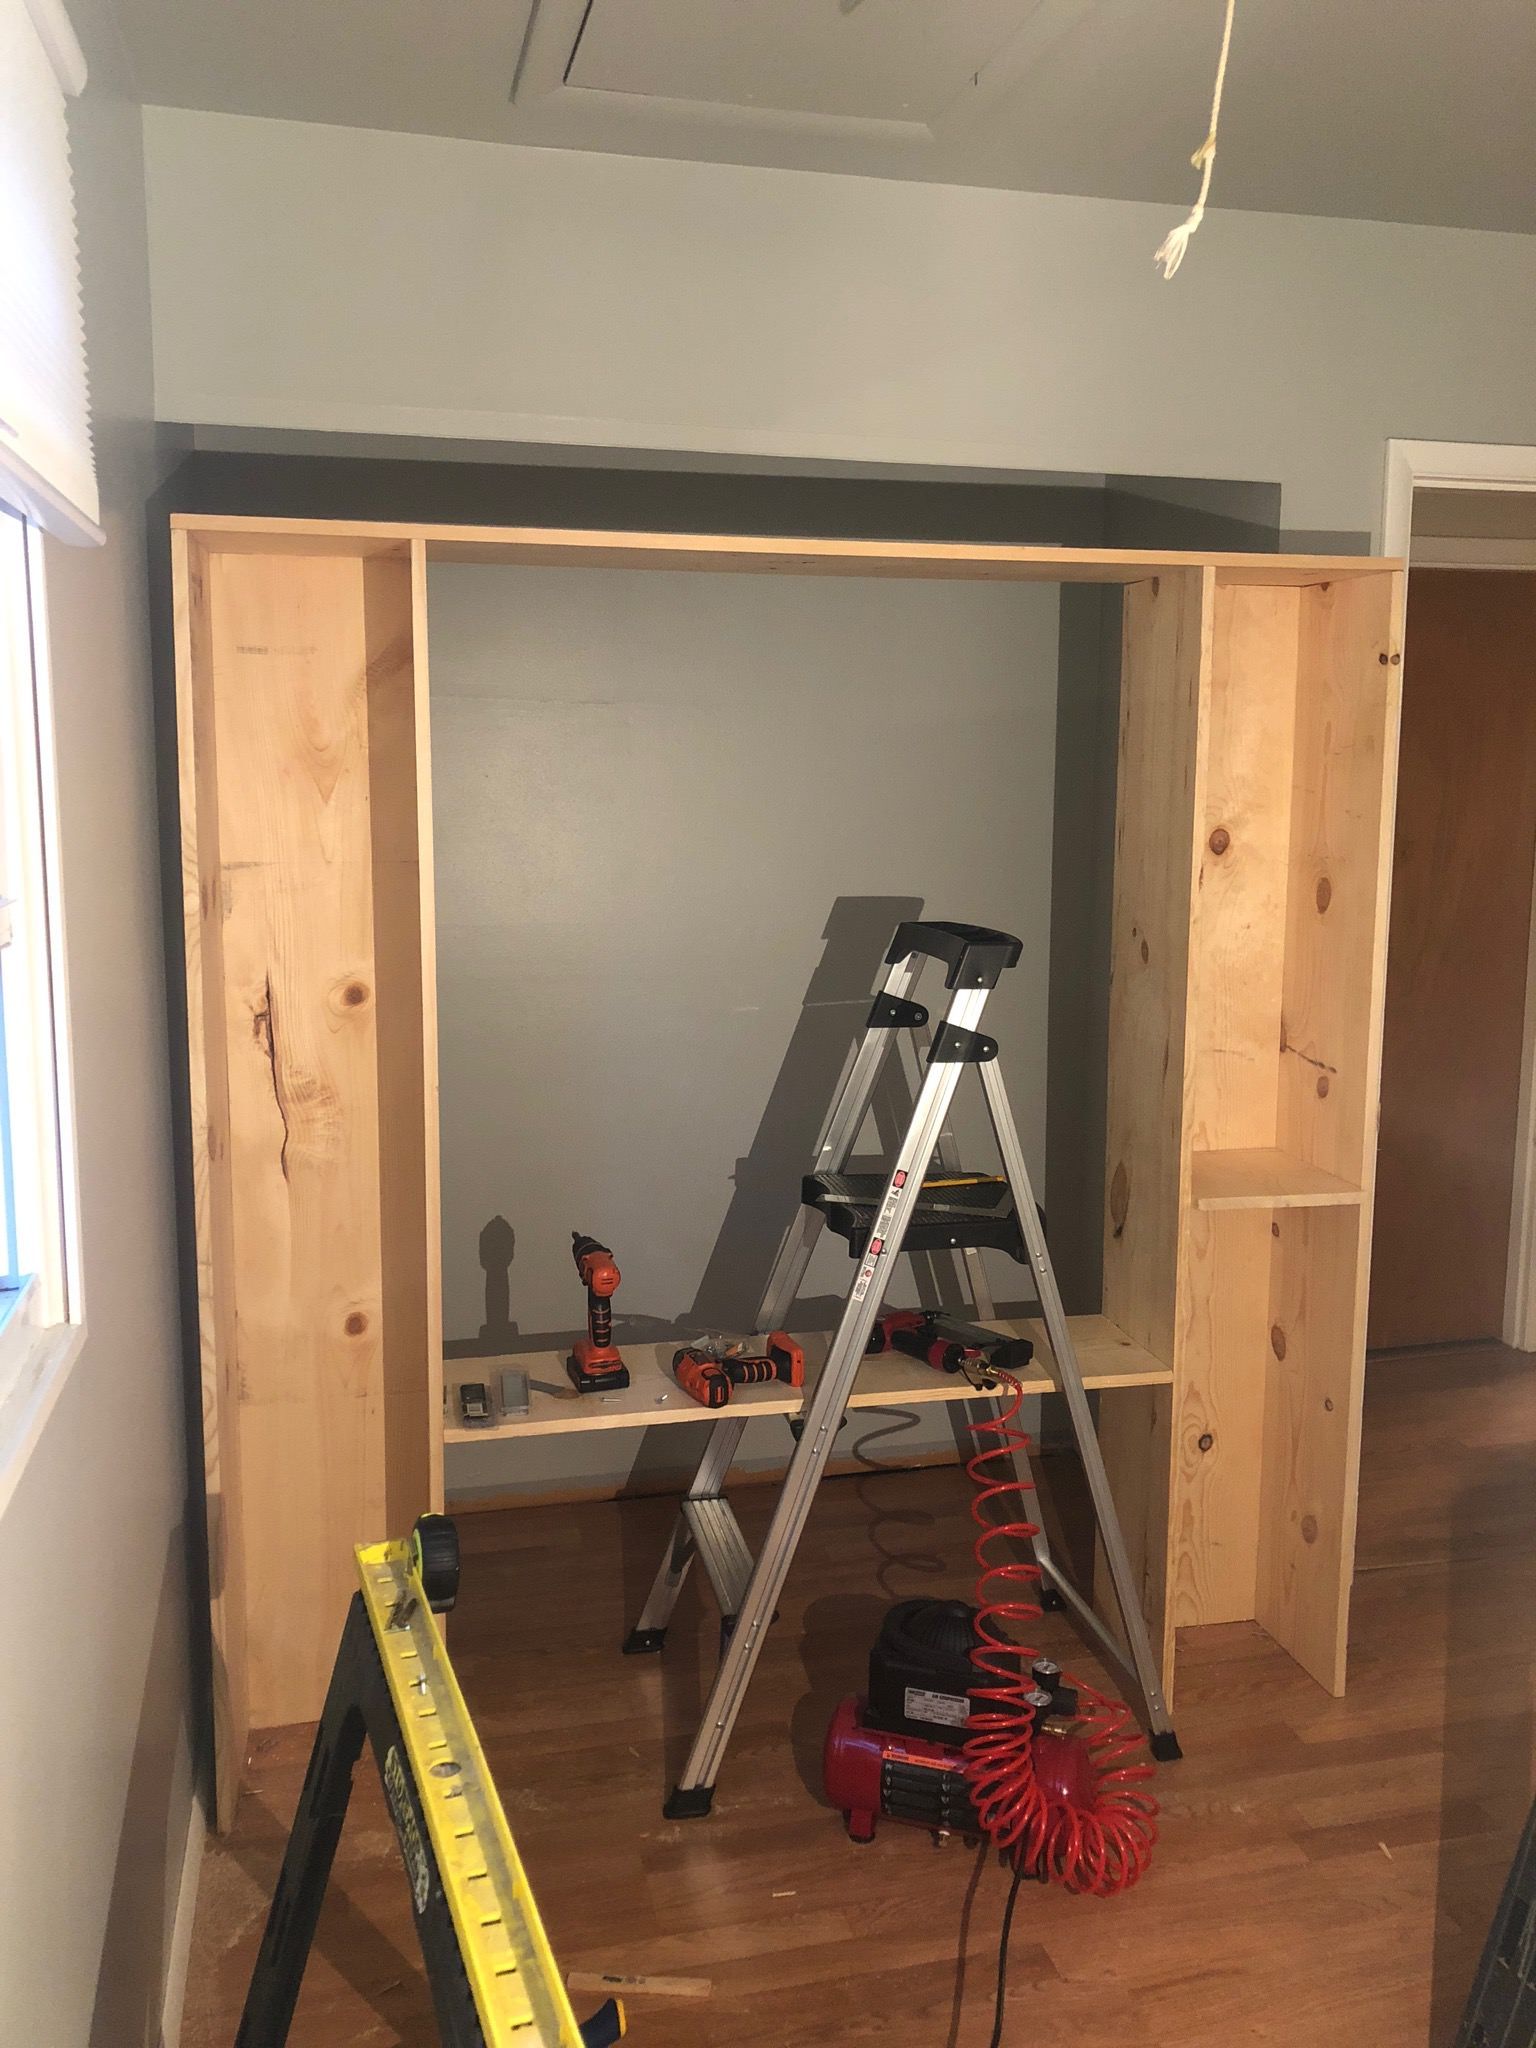 My brother in law was so proud of the shelves he built...